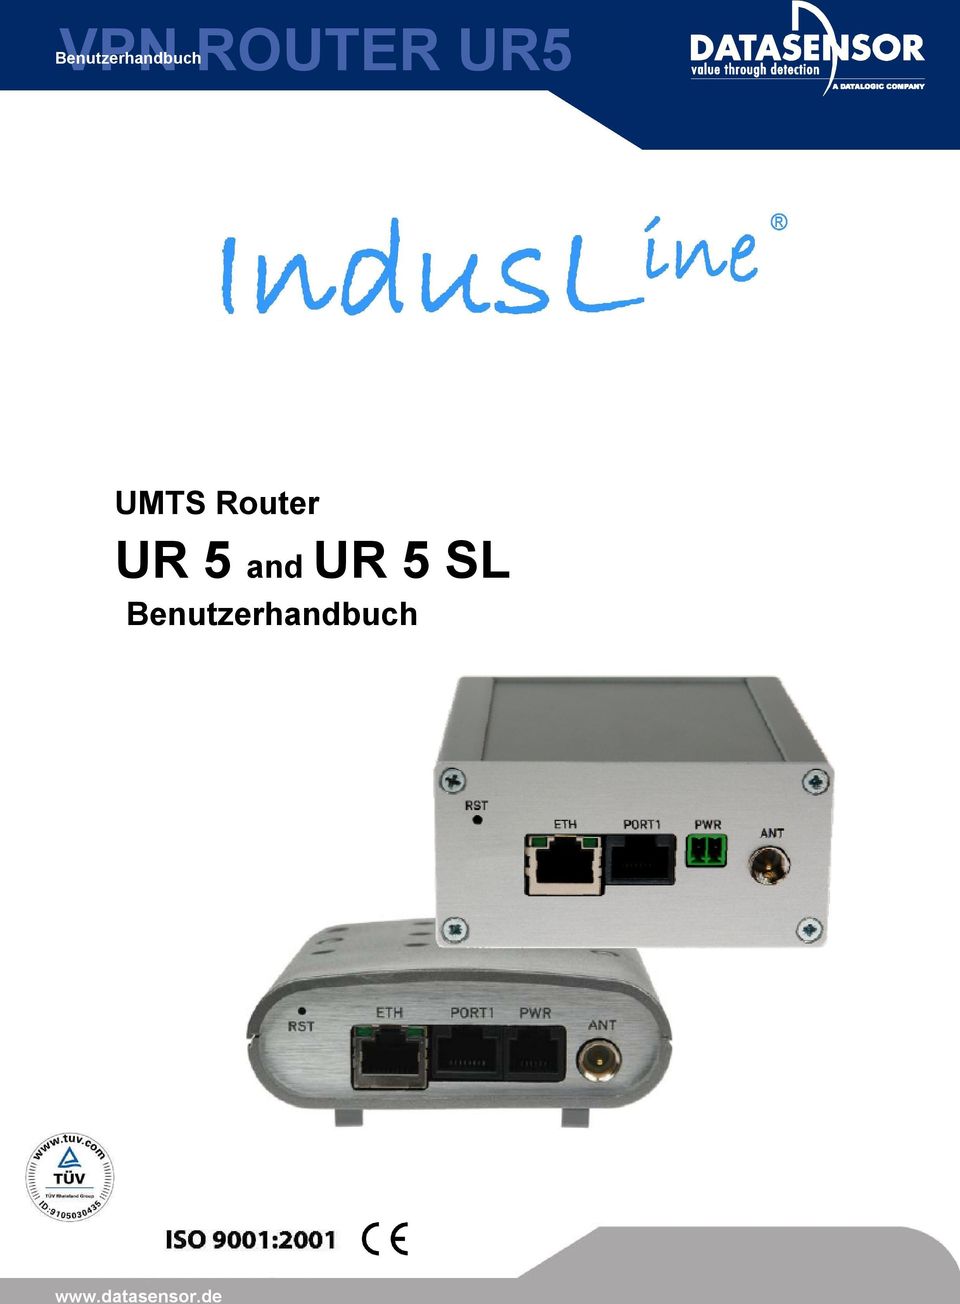 Router UR 5 and UR 5 SL